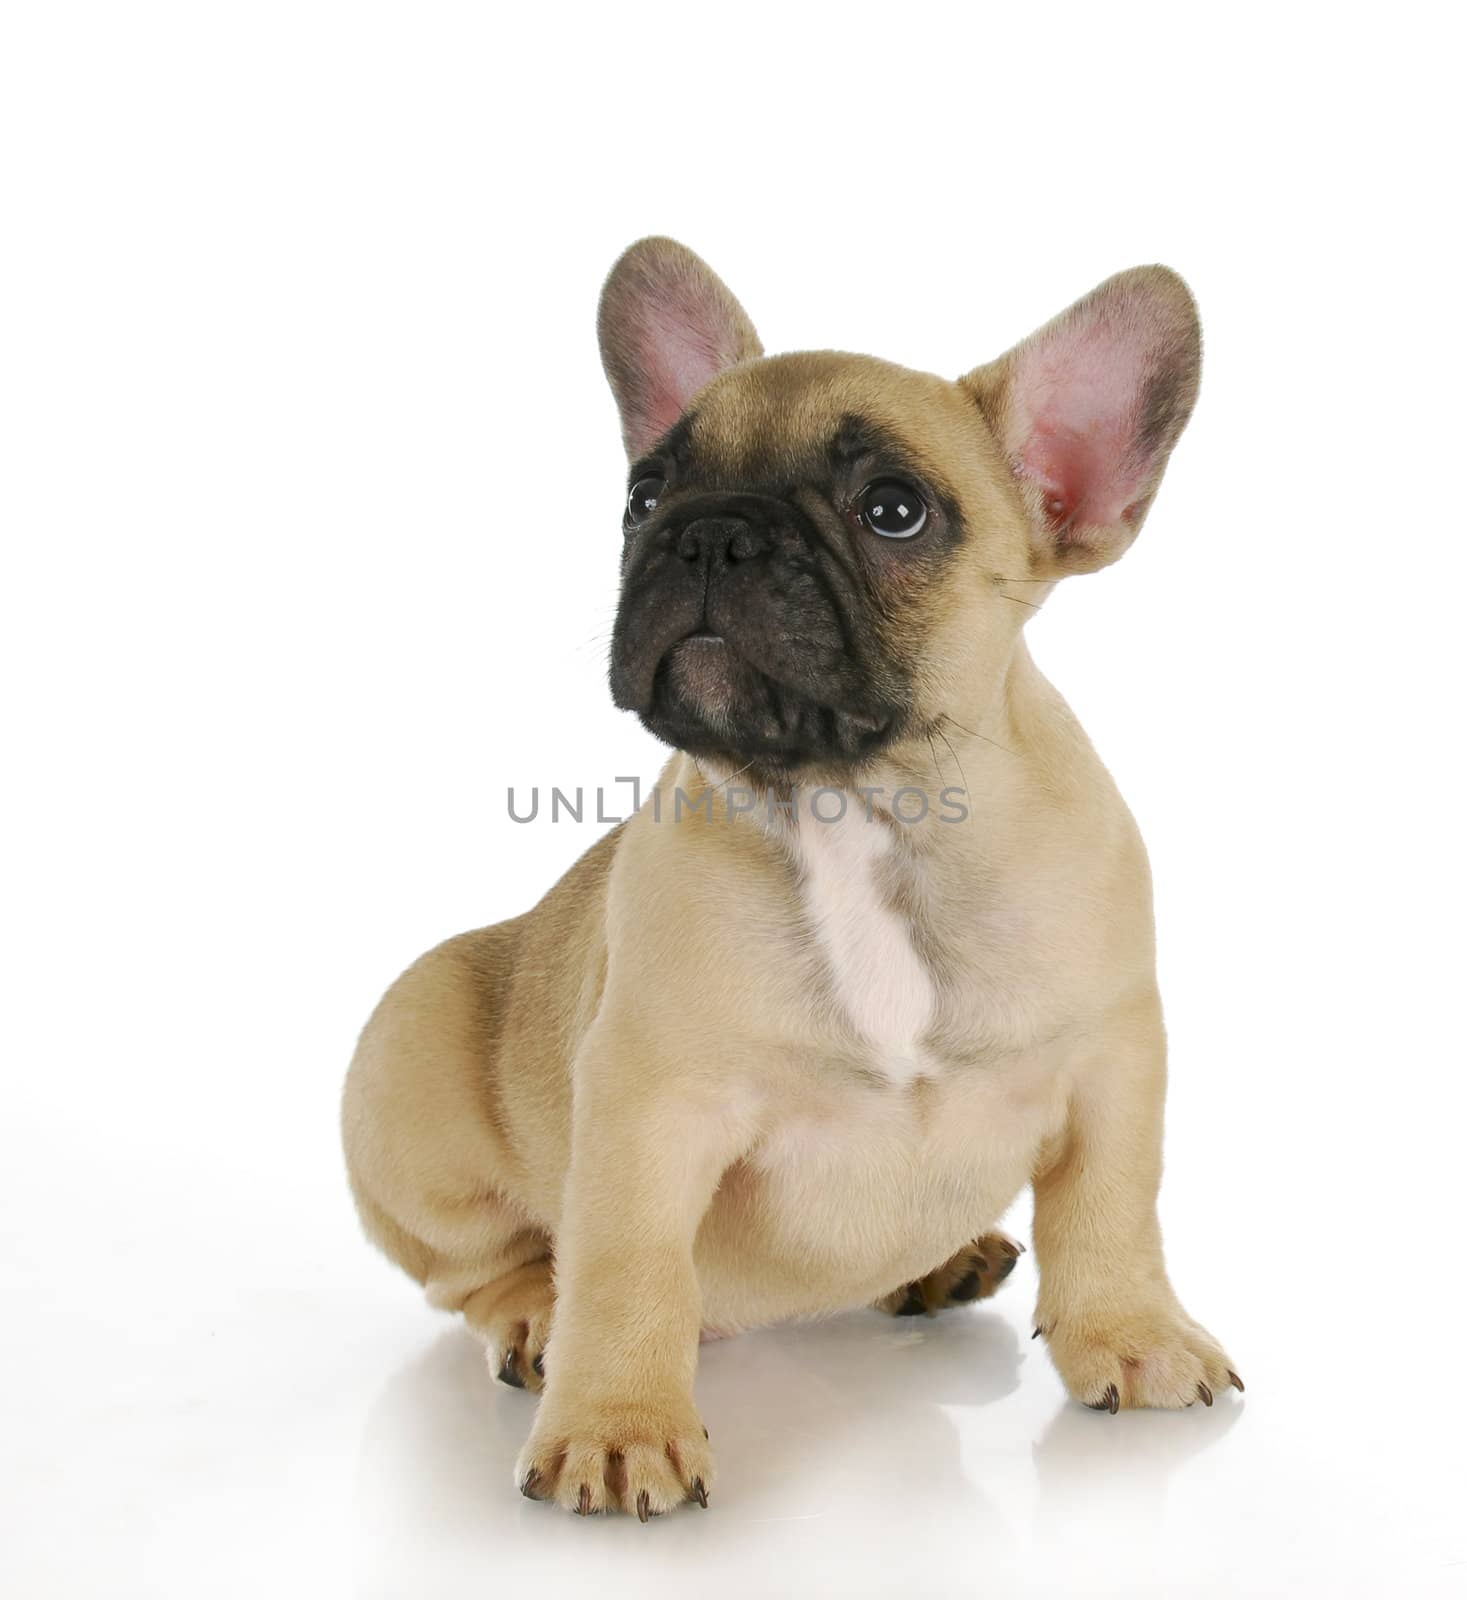 cute puppy - french bulldog puppy sitting looking up on white background - 8 weeks old